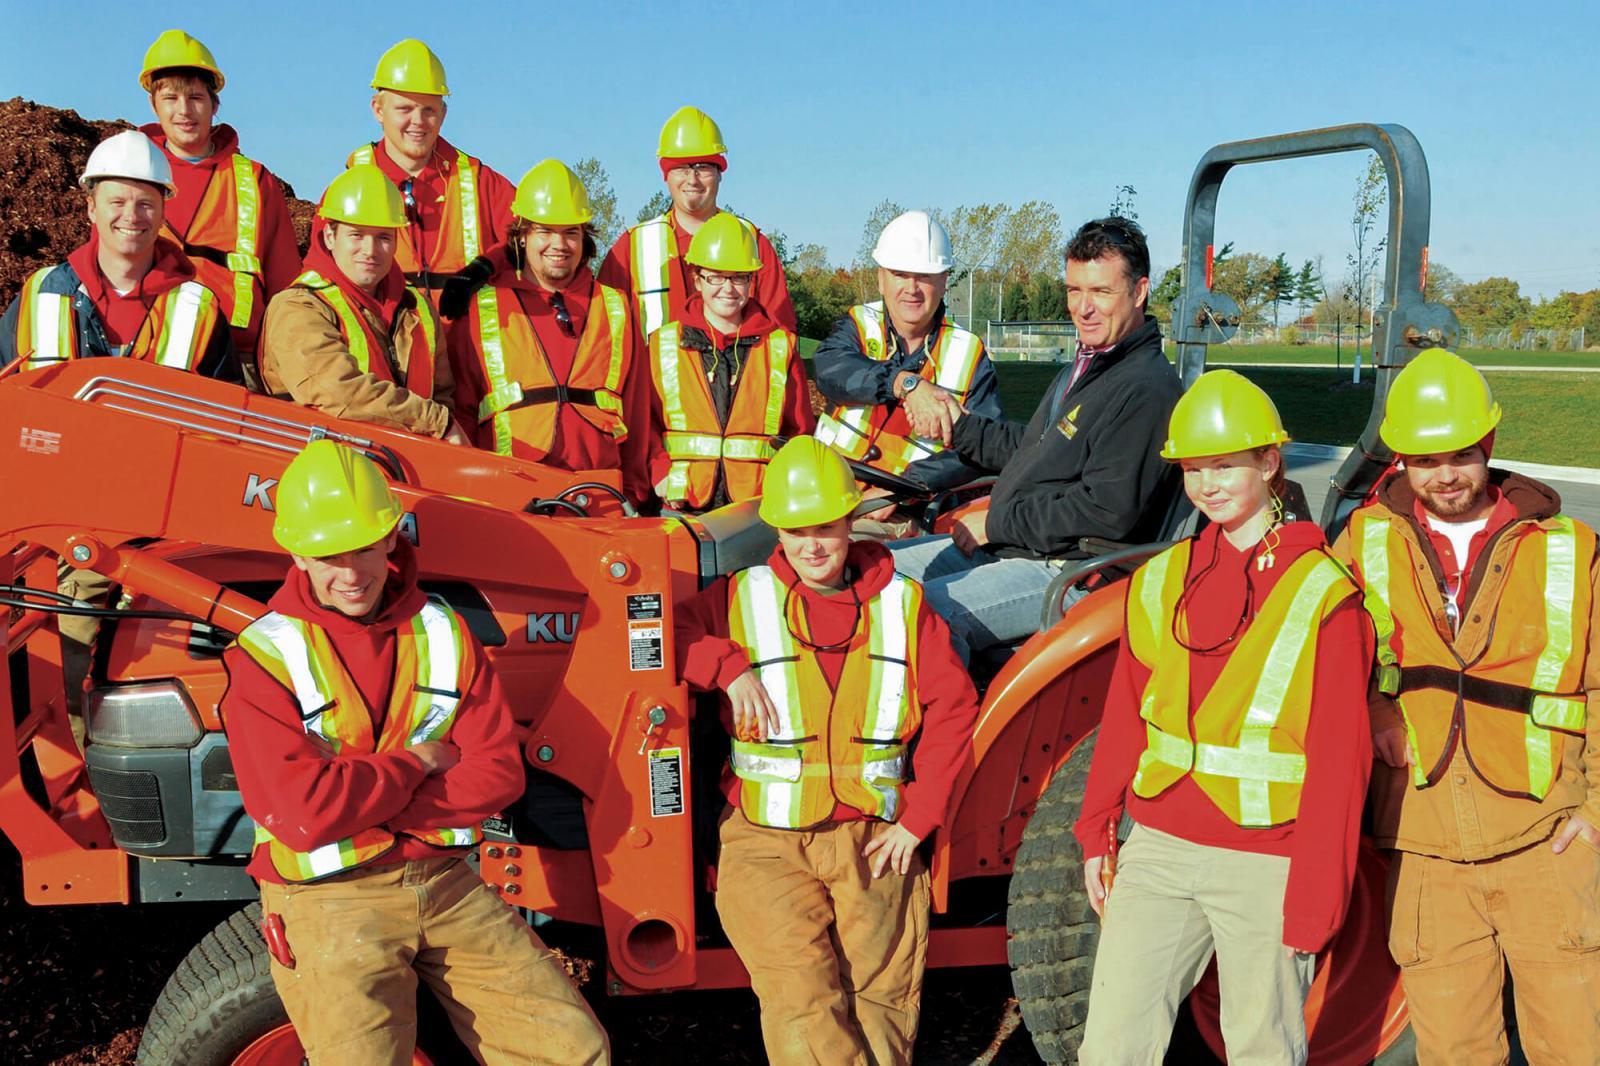 The online safety training has helped Fanshawe students become familiar with large equipment before they use it.